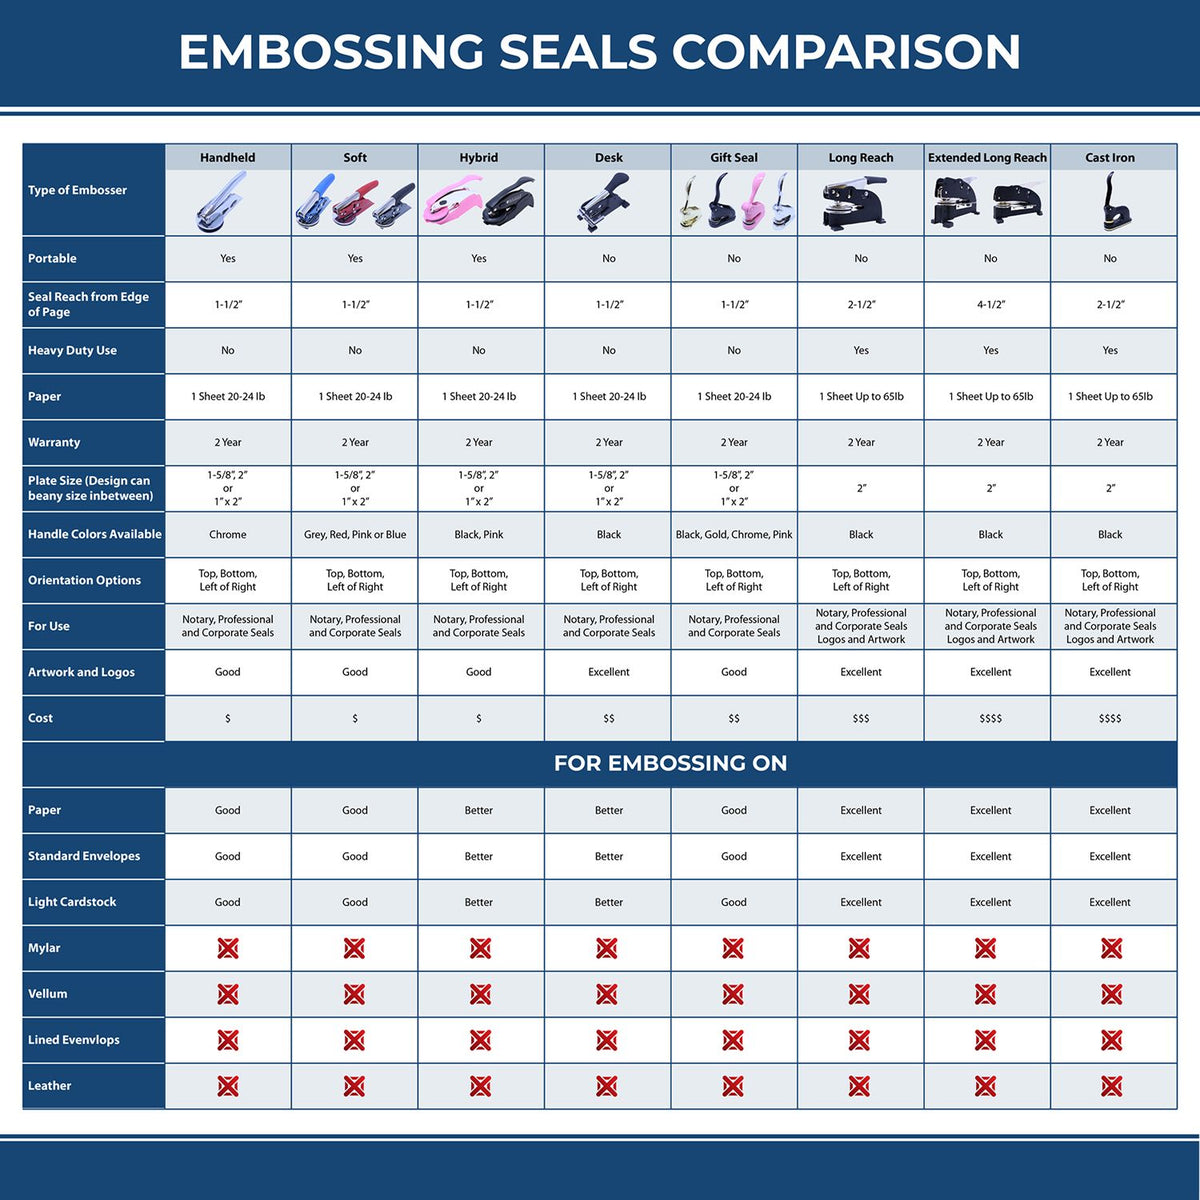 A comparison chart for the different types of mount models available for the State of Ohio Soft Land Surveyor Embossing Seal.